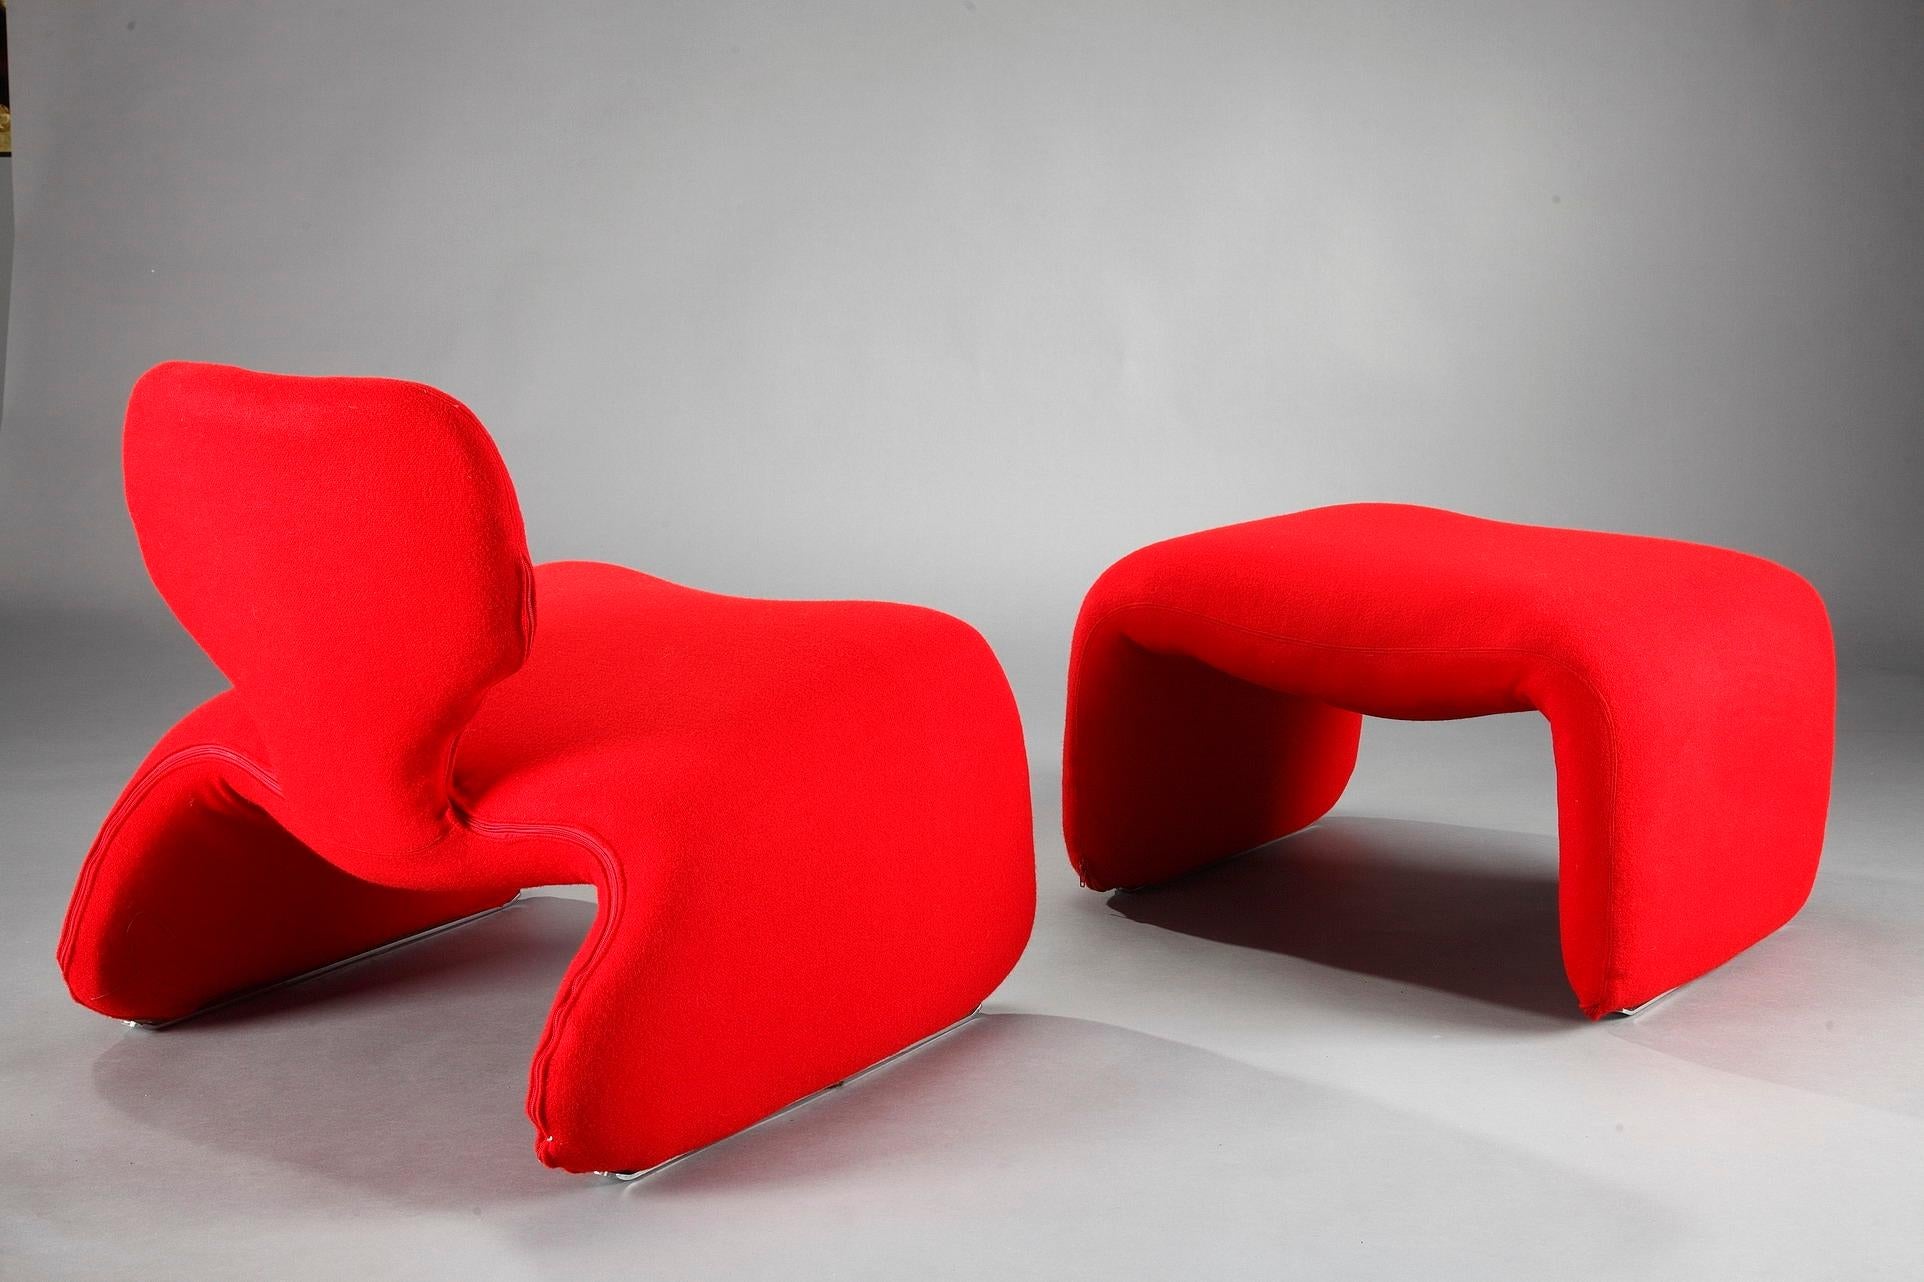 Metal Olivier Mourgue & Airborne, Red Djinn Chair for Airborne